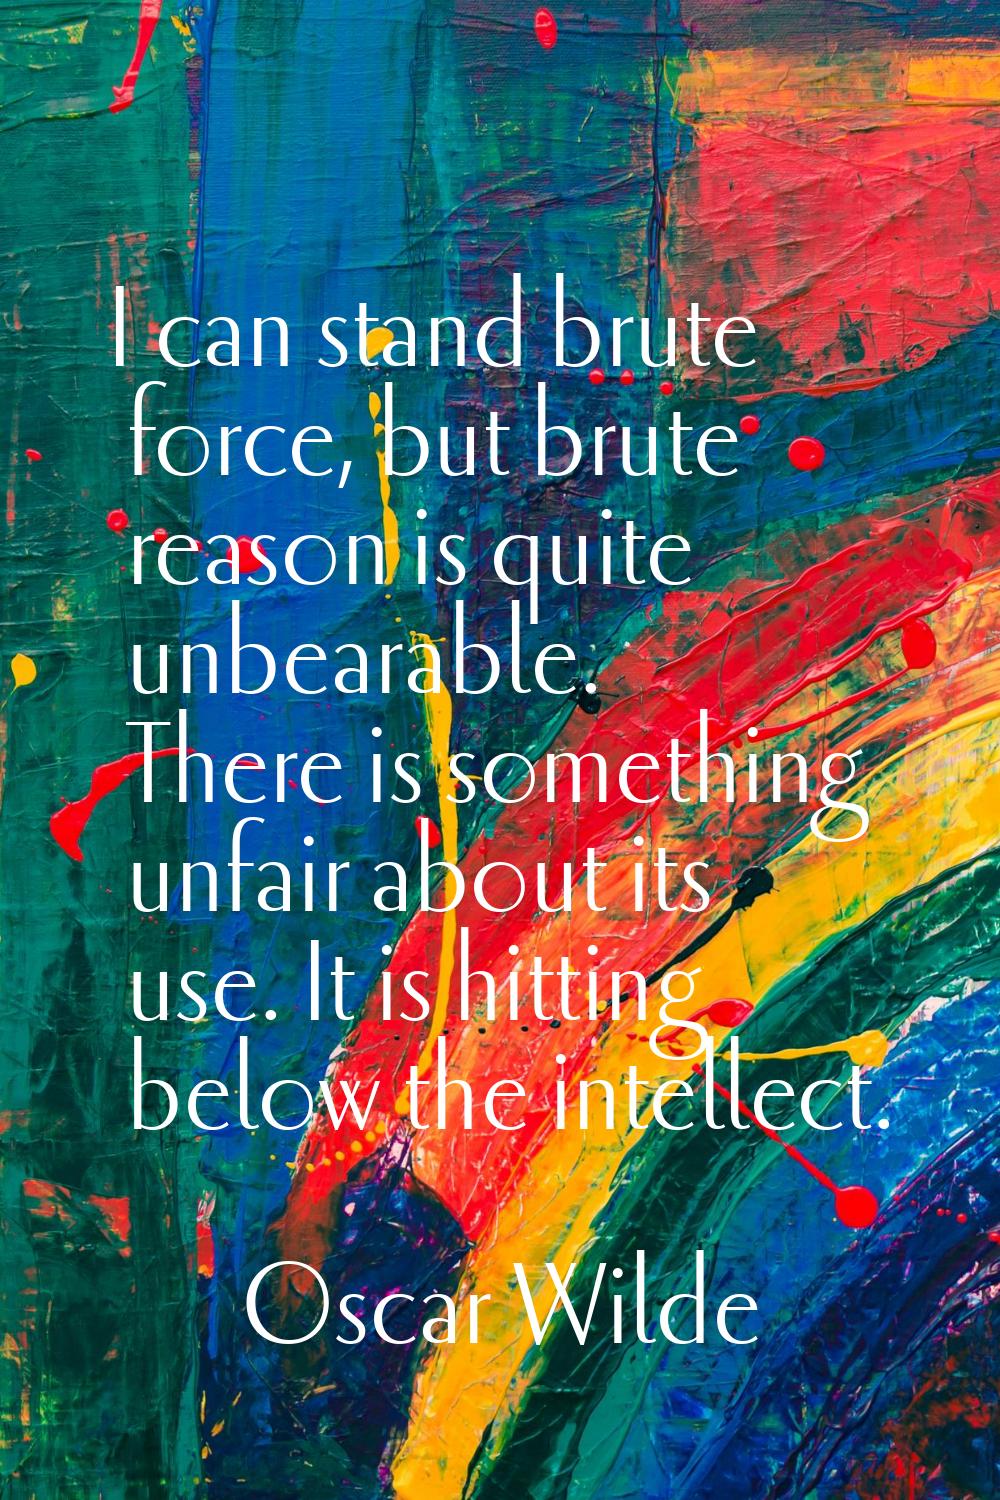 I can stand brute force, but brute reason is quite unbearable. There is something unfair about its 